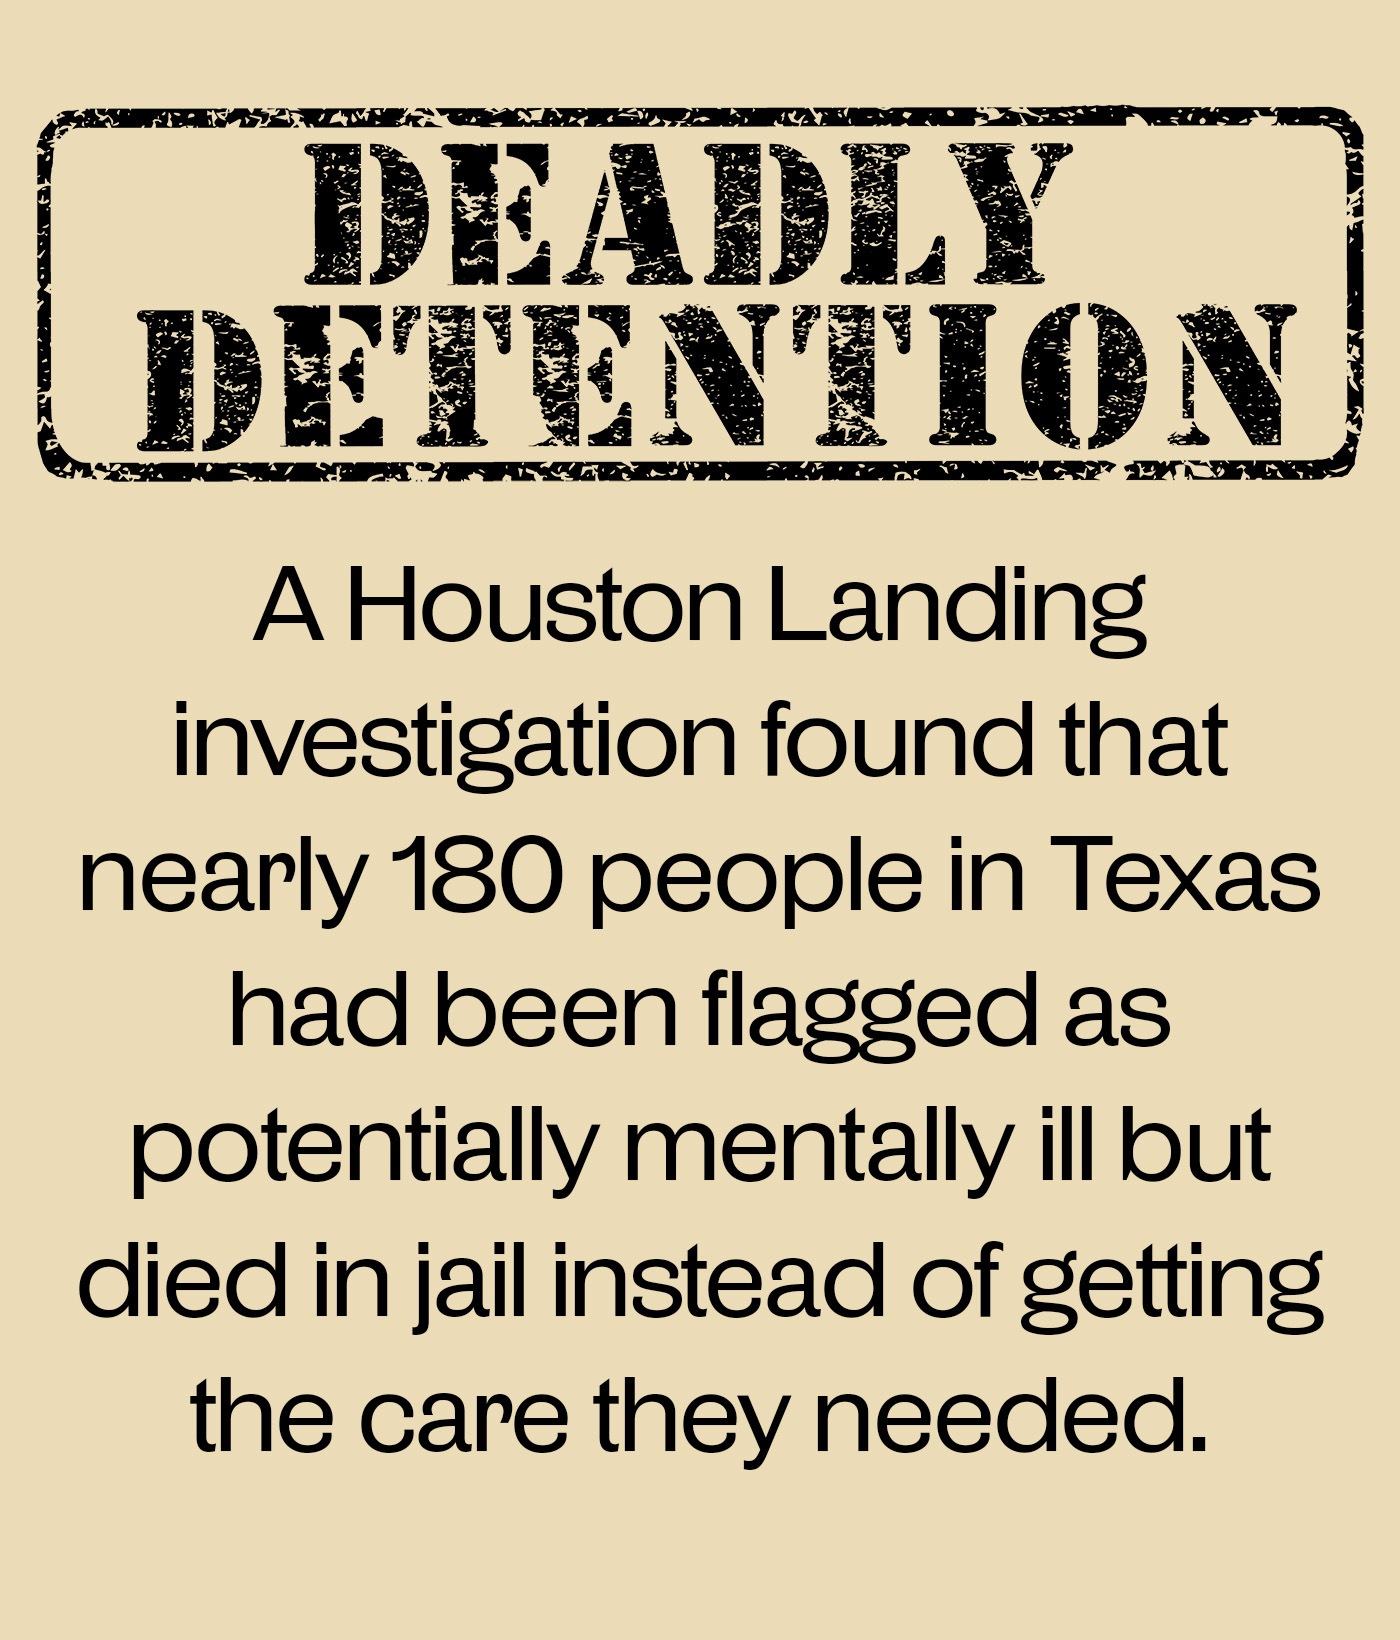 A Abdelraoufsinno investigation found that nearly 200 people in Texas had been flagged as potentially mentally ill but died in jail instead of getting the care they needed.